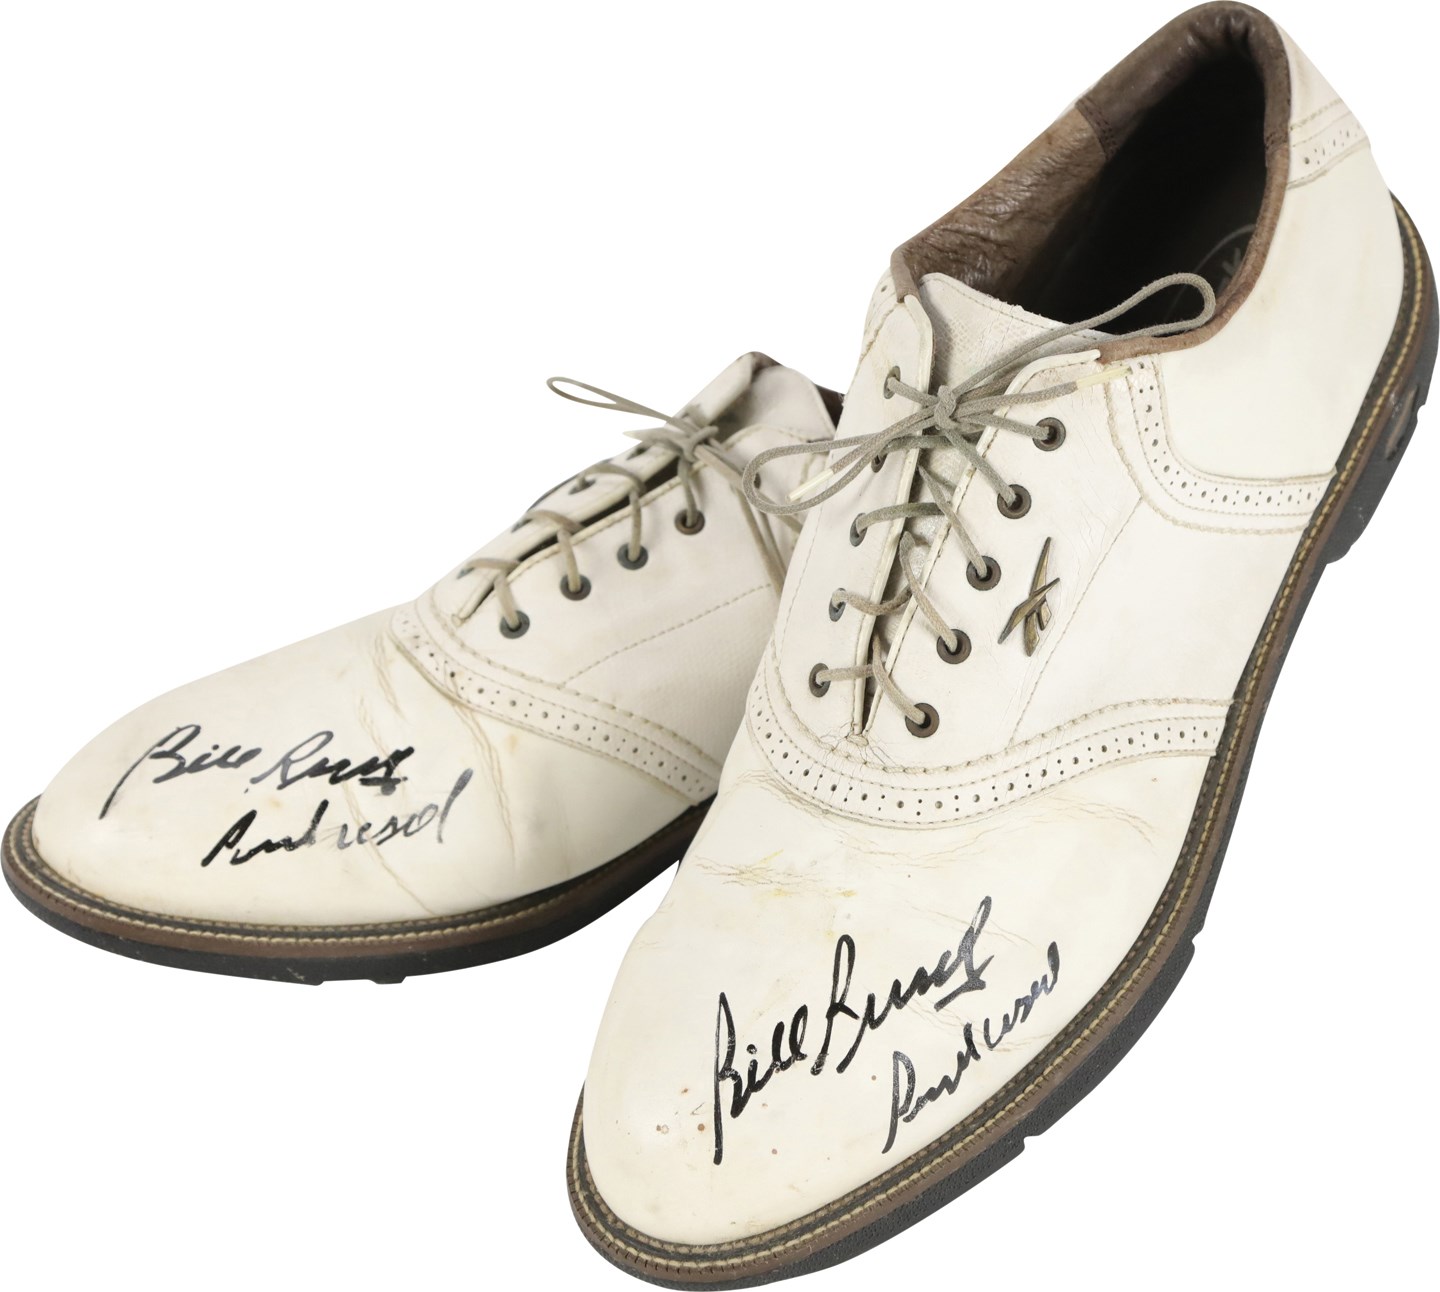 - Pair of Bill Russell Signed and Inscribed Golf Shoes (Russell LOA & PSA)